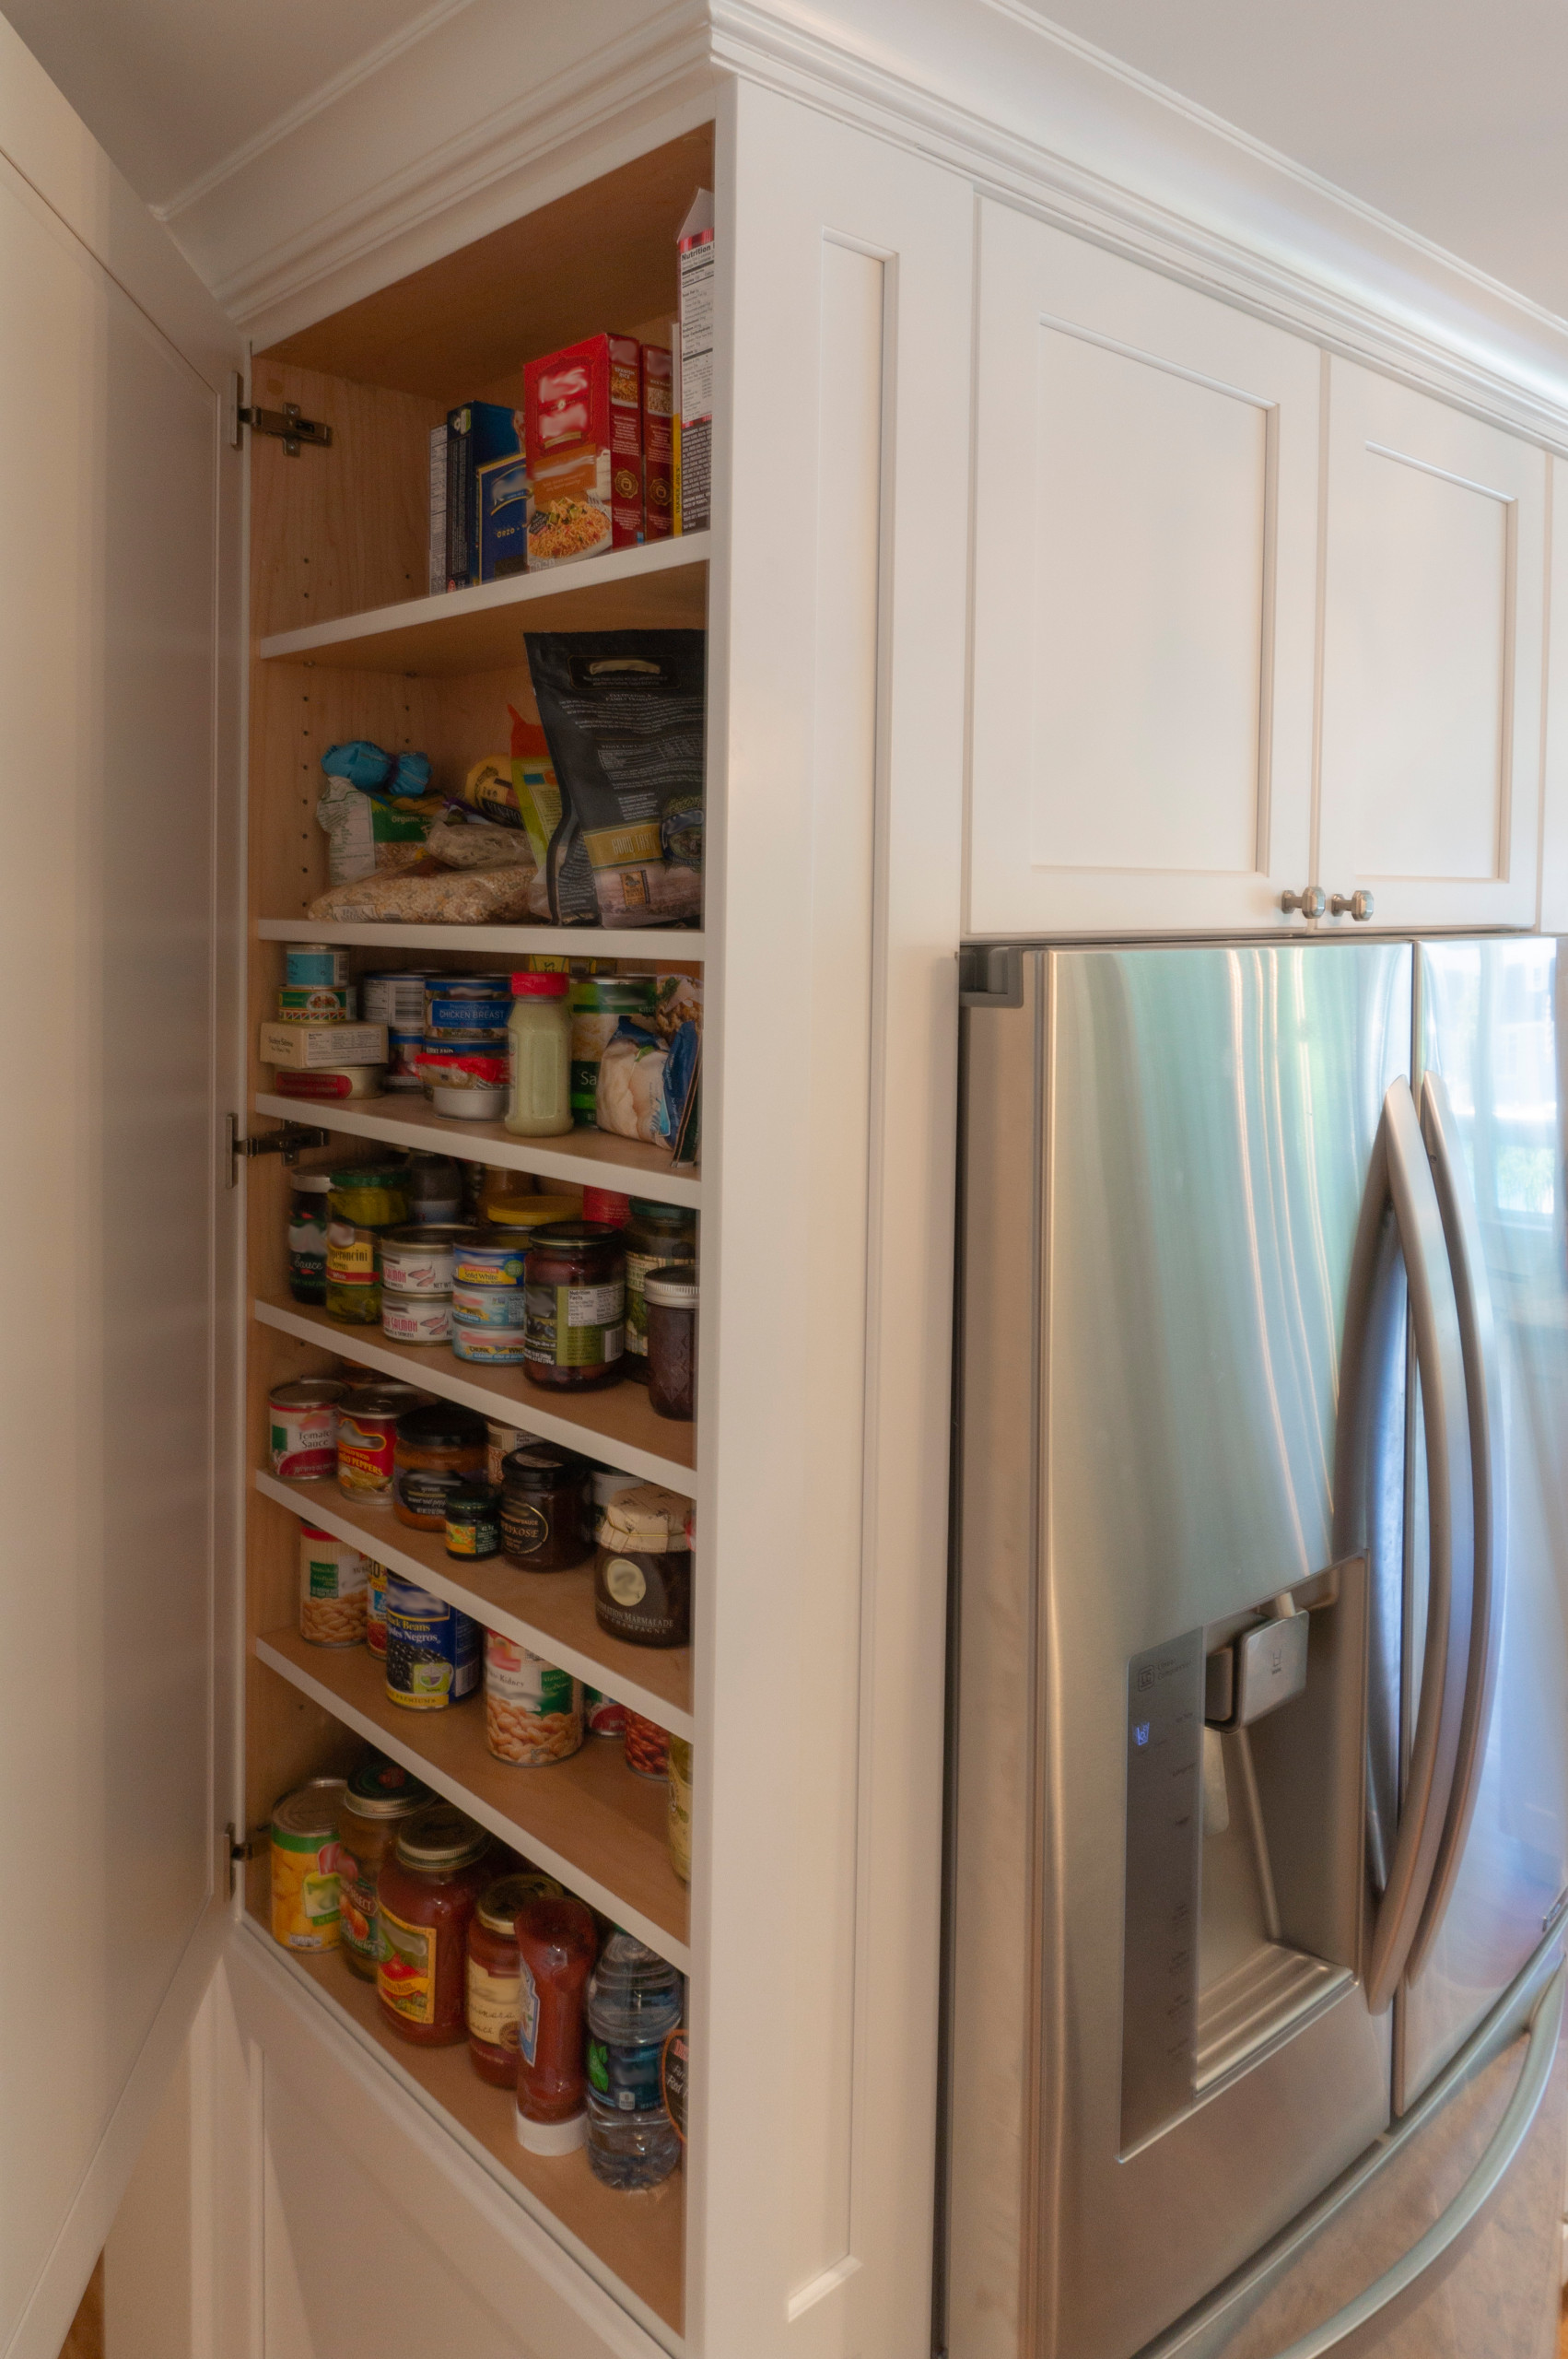 The Unique Shallow Pantry Is A Favorite With My Clients Here Done At 9 Deep Wi Mh Baker Llc Img~d441ea3b0b802f0e 14 2806 1 8557922 